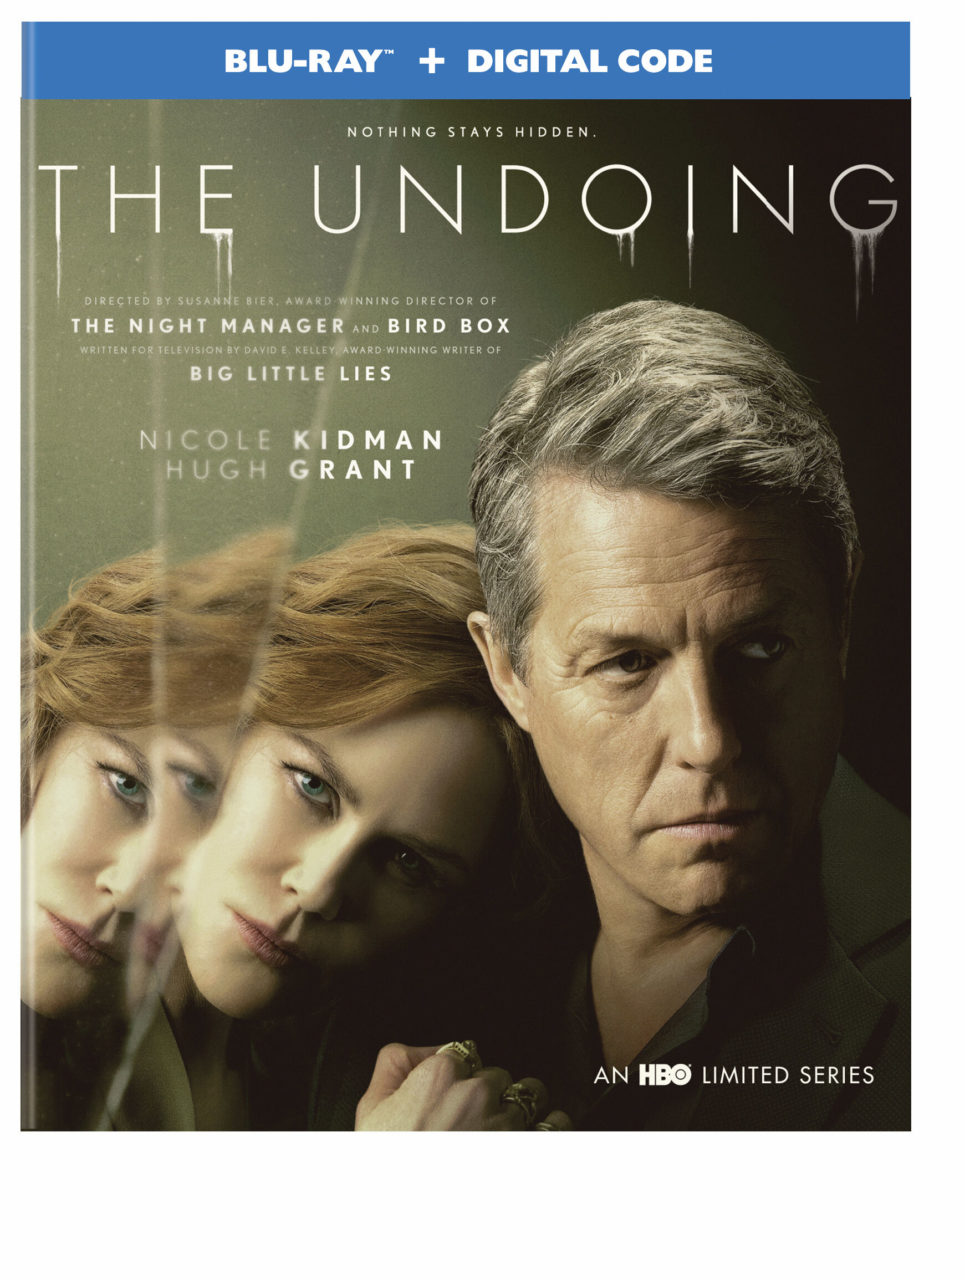 The Undoing: An HBO Limited Series Blu-Ray Combo Pack cover (Warner Bros. Home Entertainment)